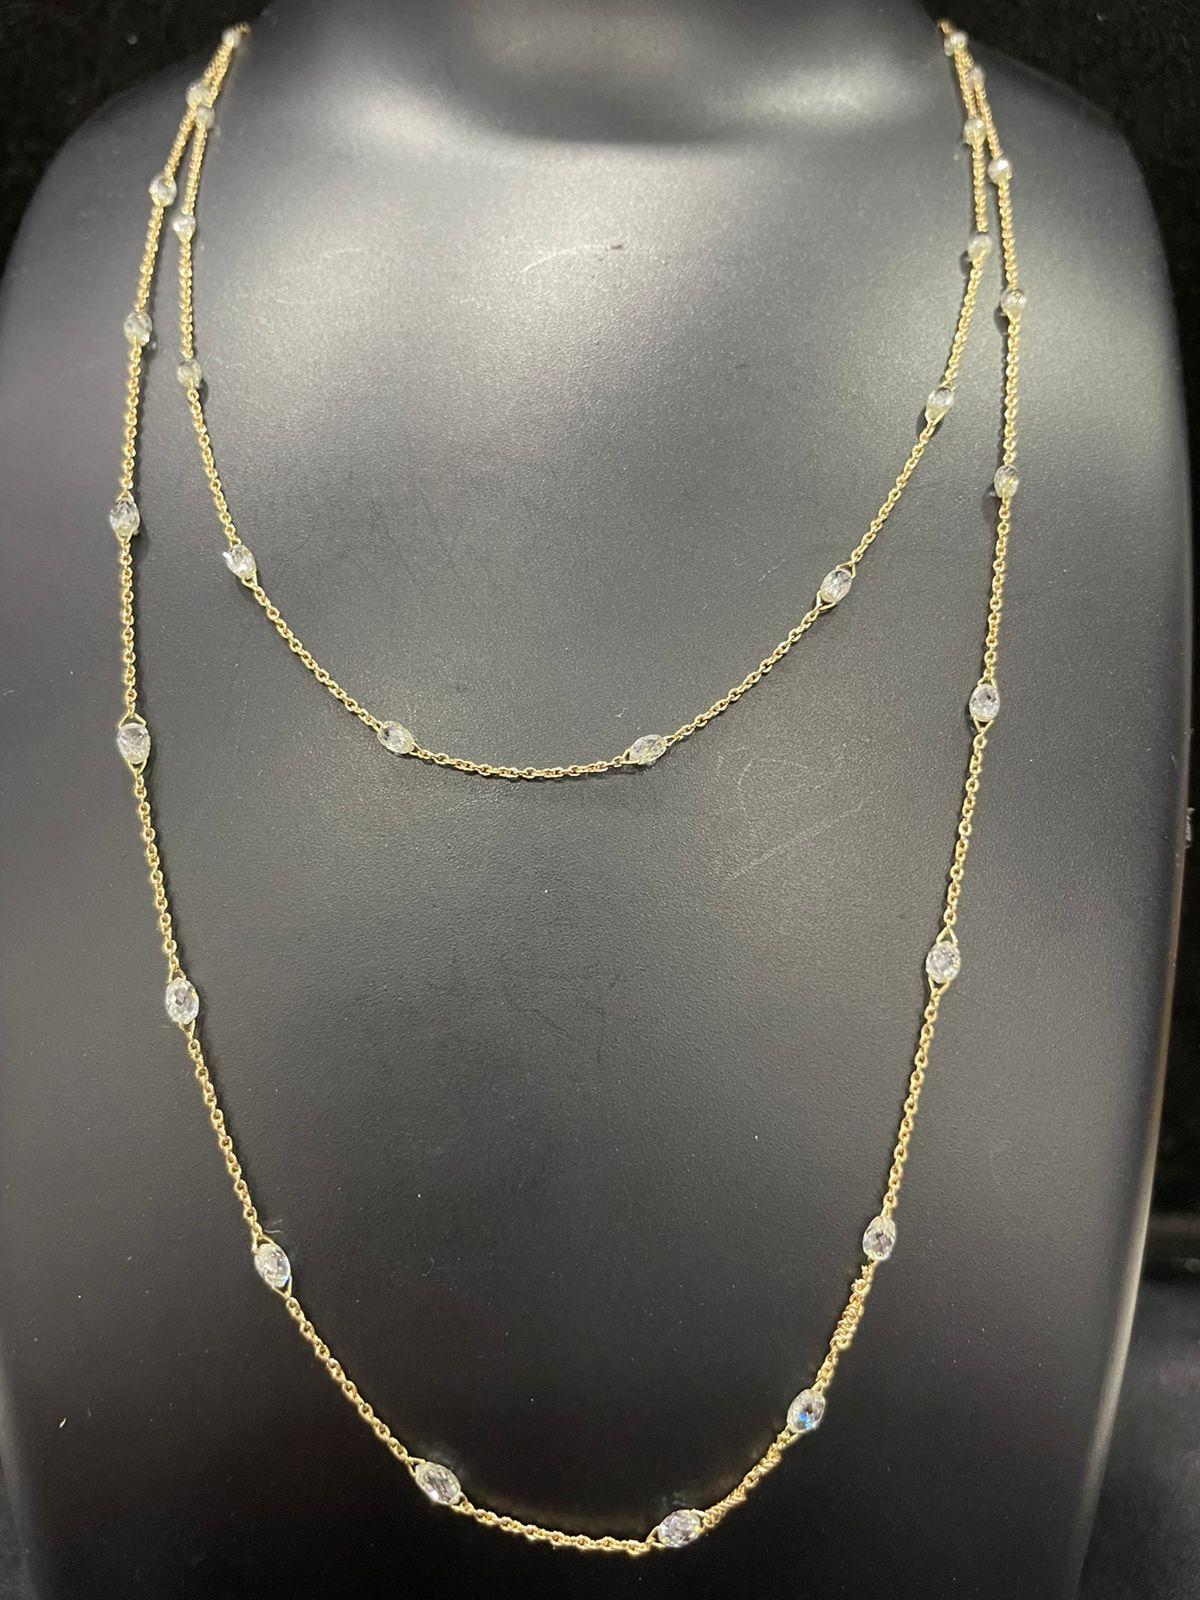 PANIM Briolette Diamond Circles Necklace in 18 Karat Gold

A daily wear necklace in 18K Yellow Gold with Briolette diamond weighing 5cts.

Specifications : 
Color : G+
Clarity : VS+

Length : 32inches(can be customized)

Customization available in